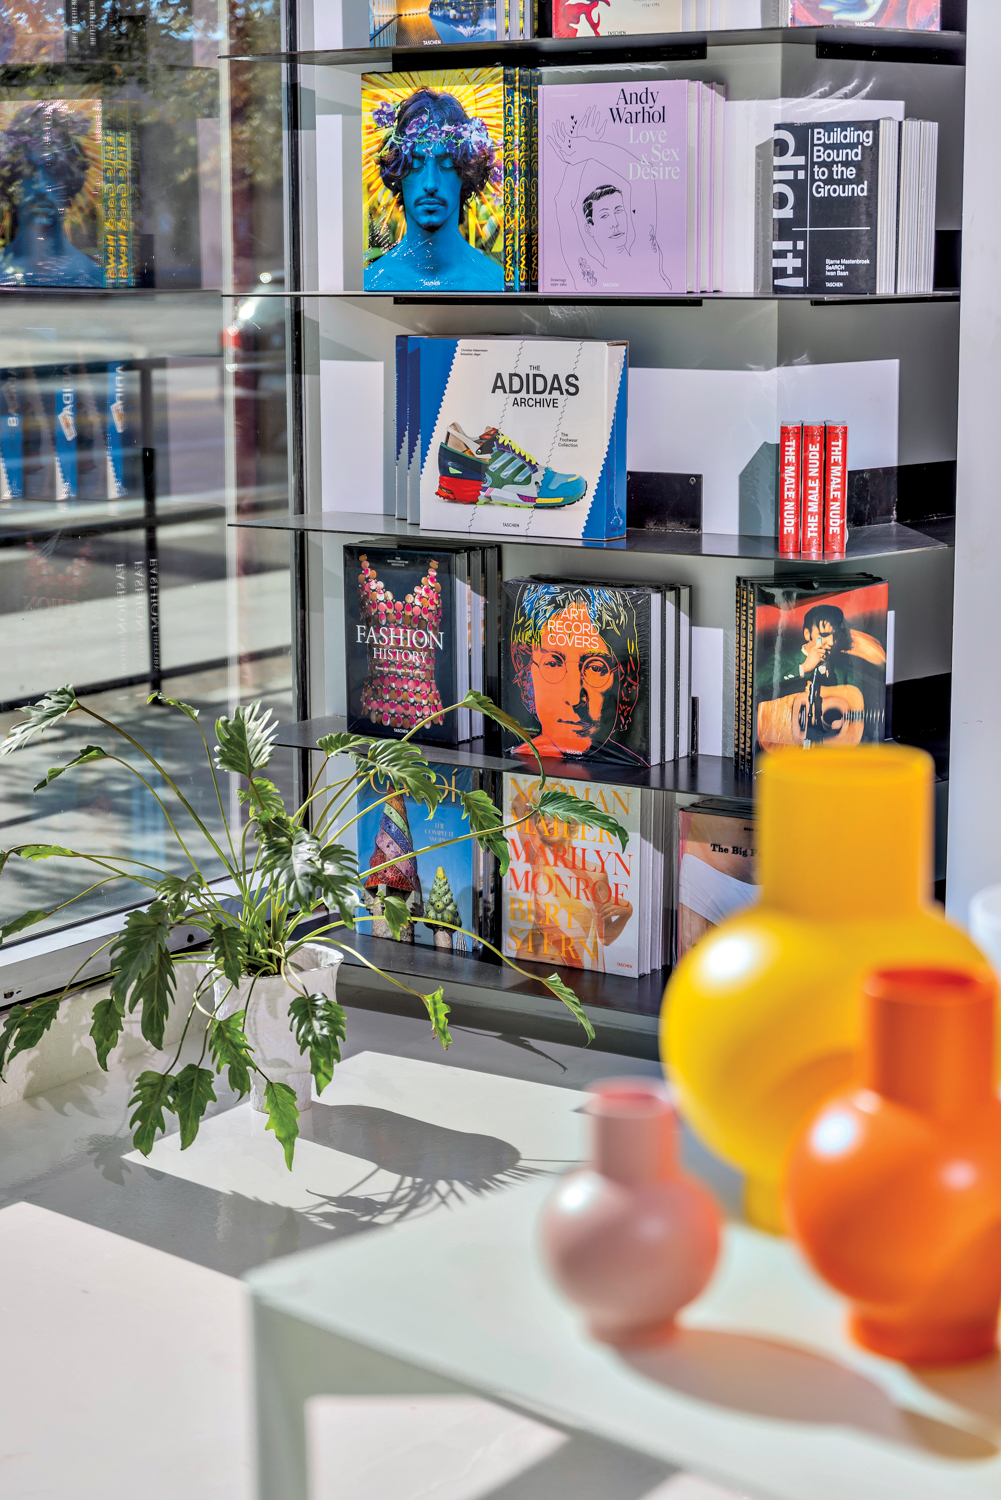 Books on display next to a plant and ceramic home goods inside Dialog shop